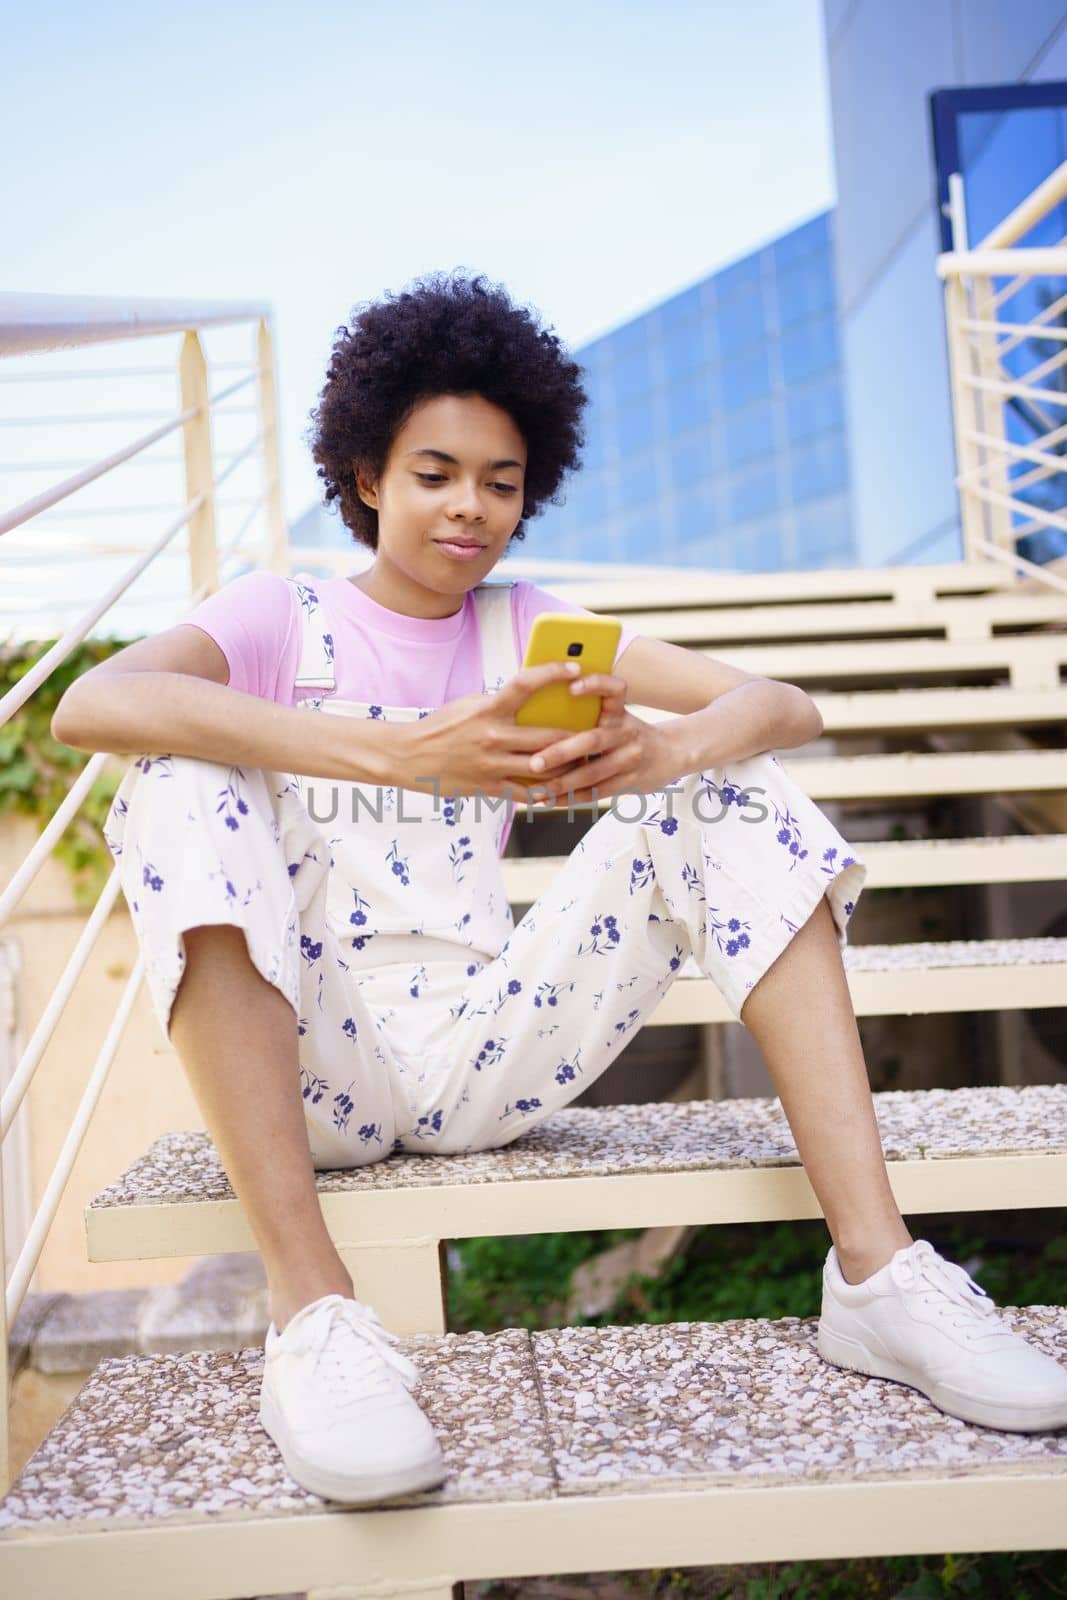 Black woman texting with her smartphone, sitting on steps of a modern building. by javiindy